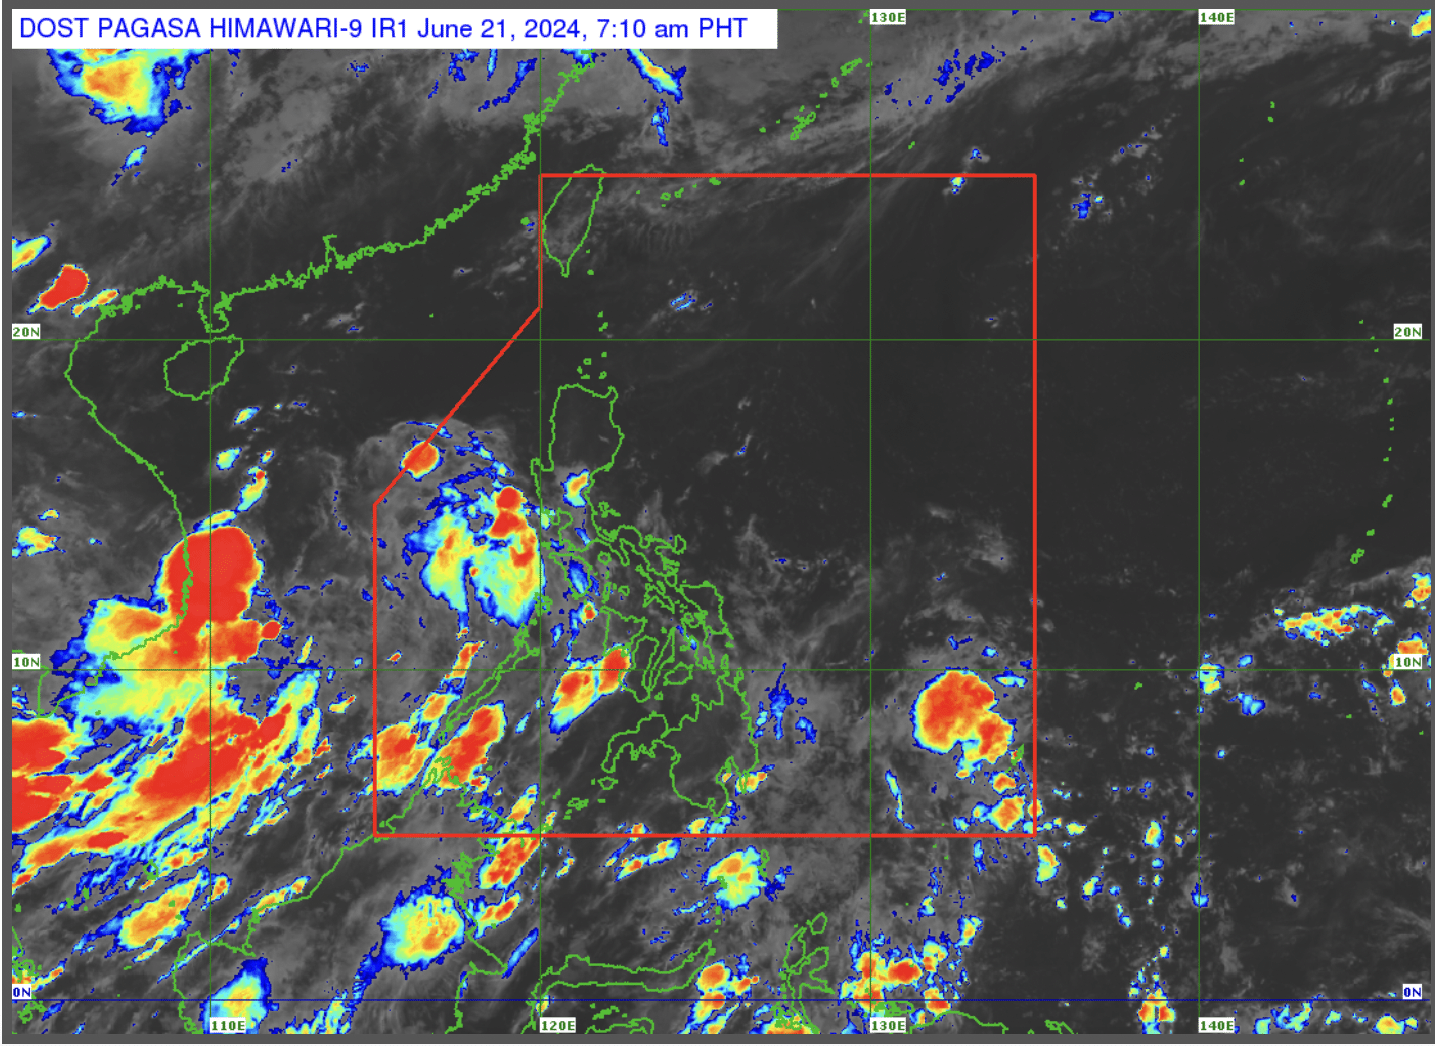 Pagasa: Cloudy Friday with isolated rain showers